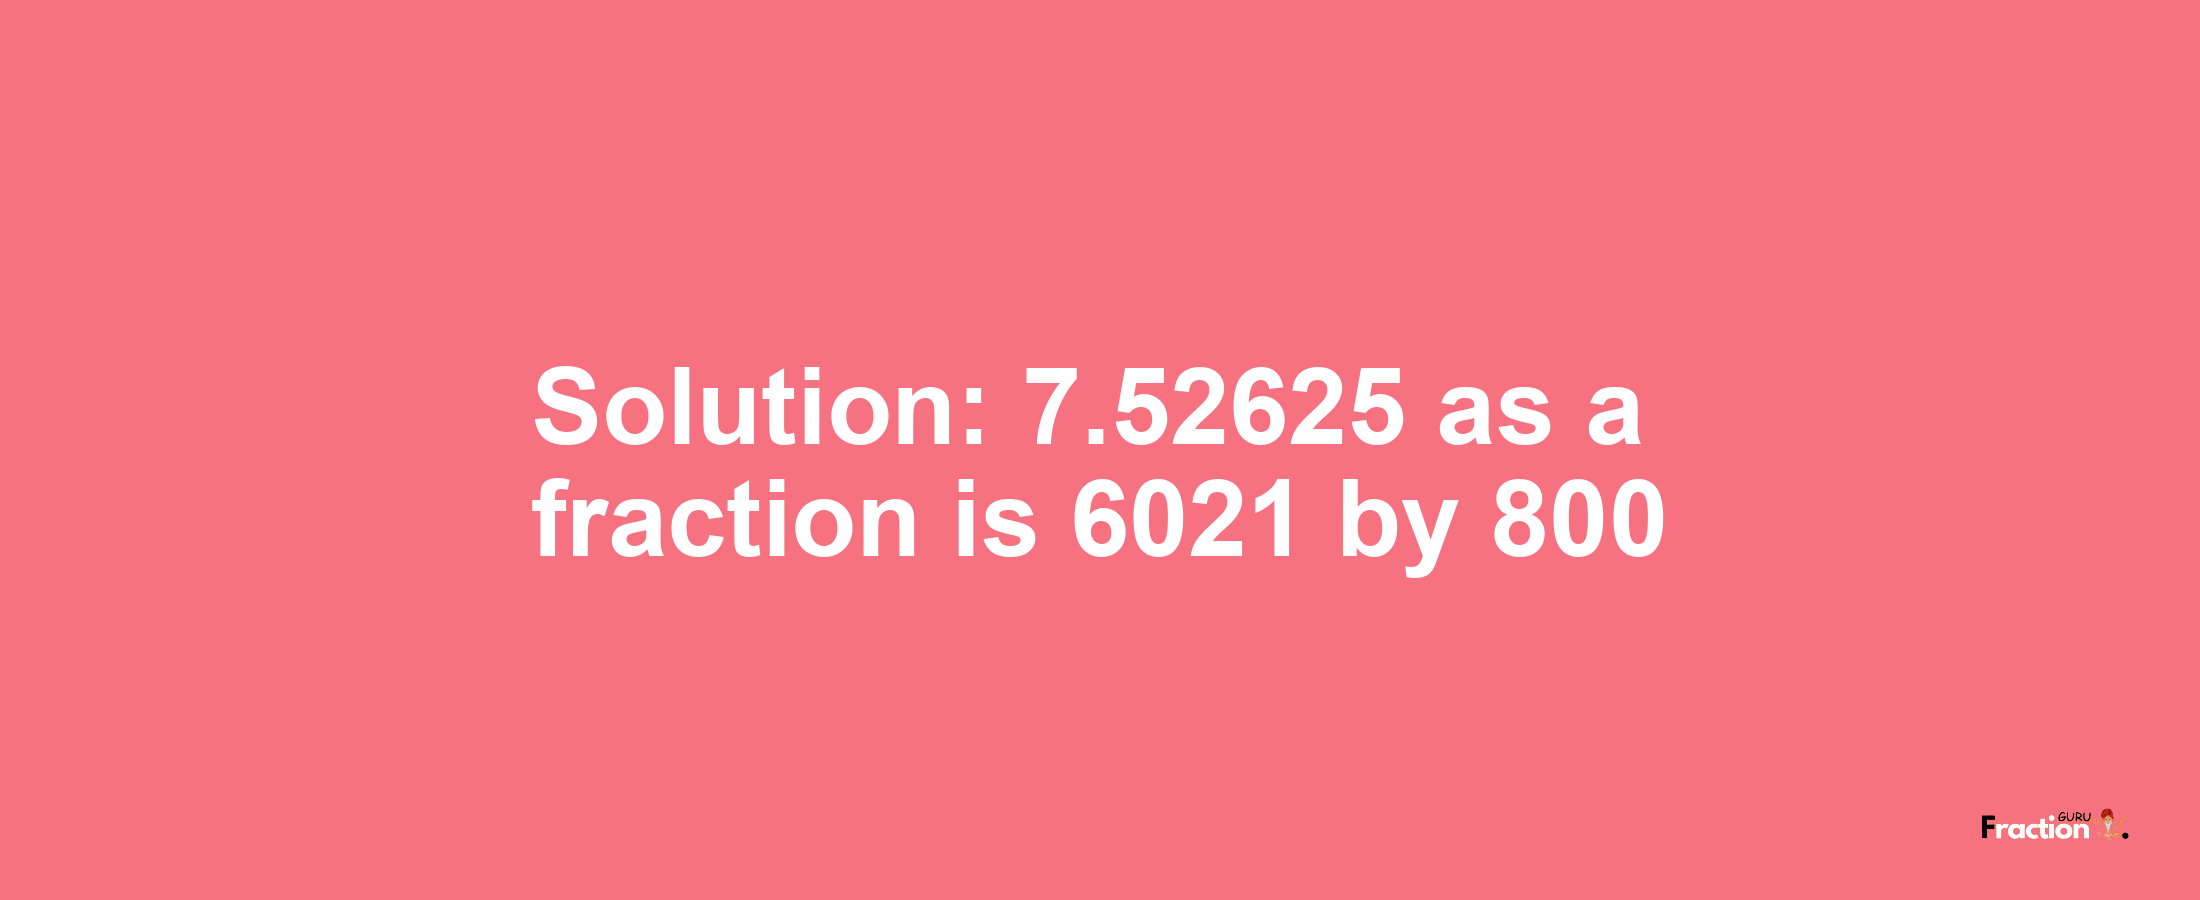 Solution:7.52625 as a fraction is 6021/800